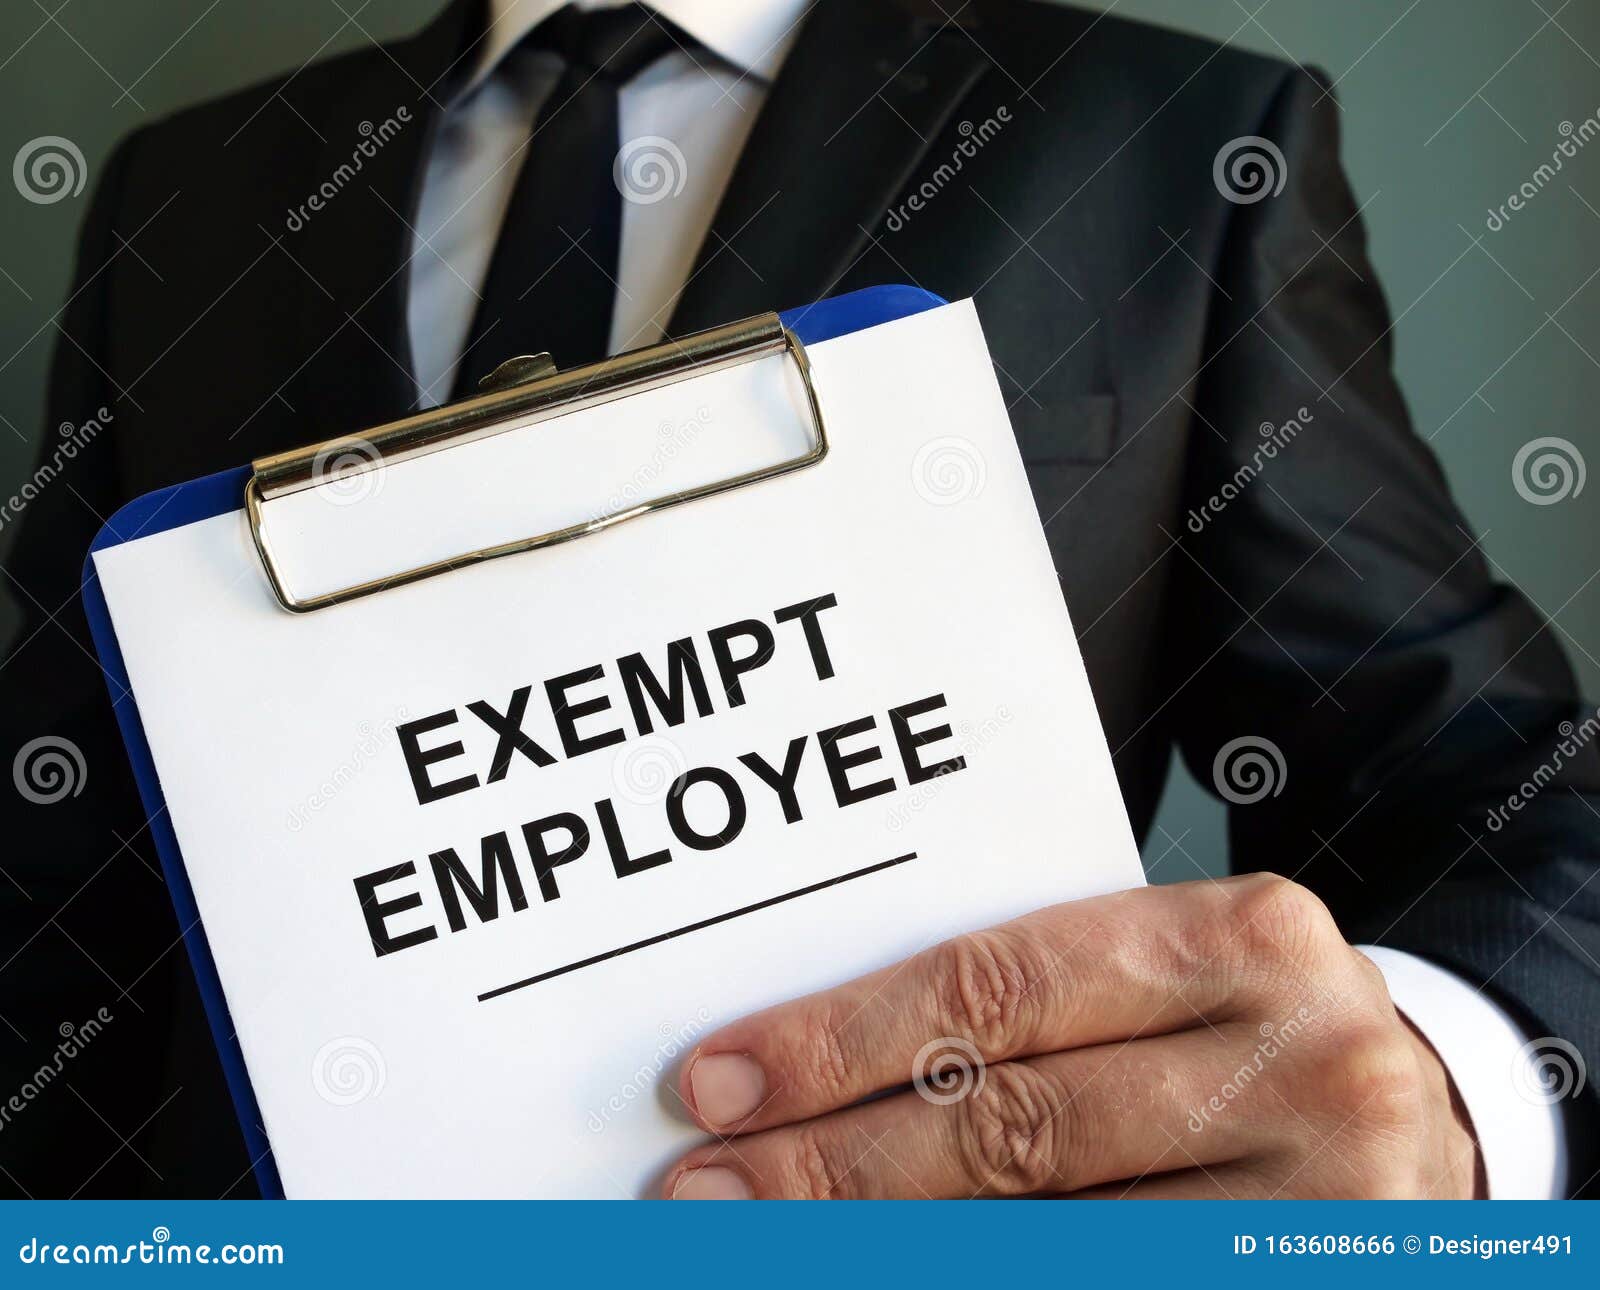 exempt employee sign is in the hand